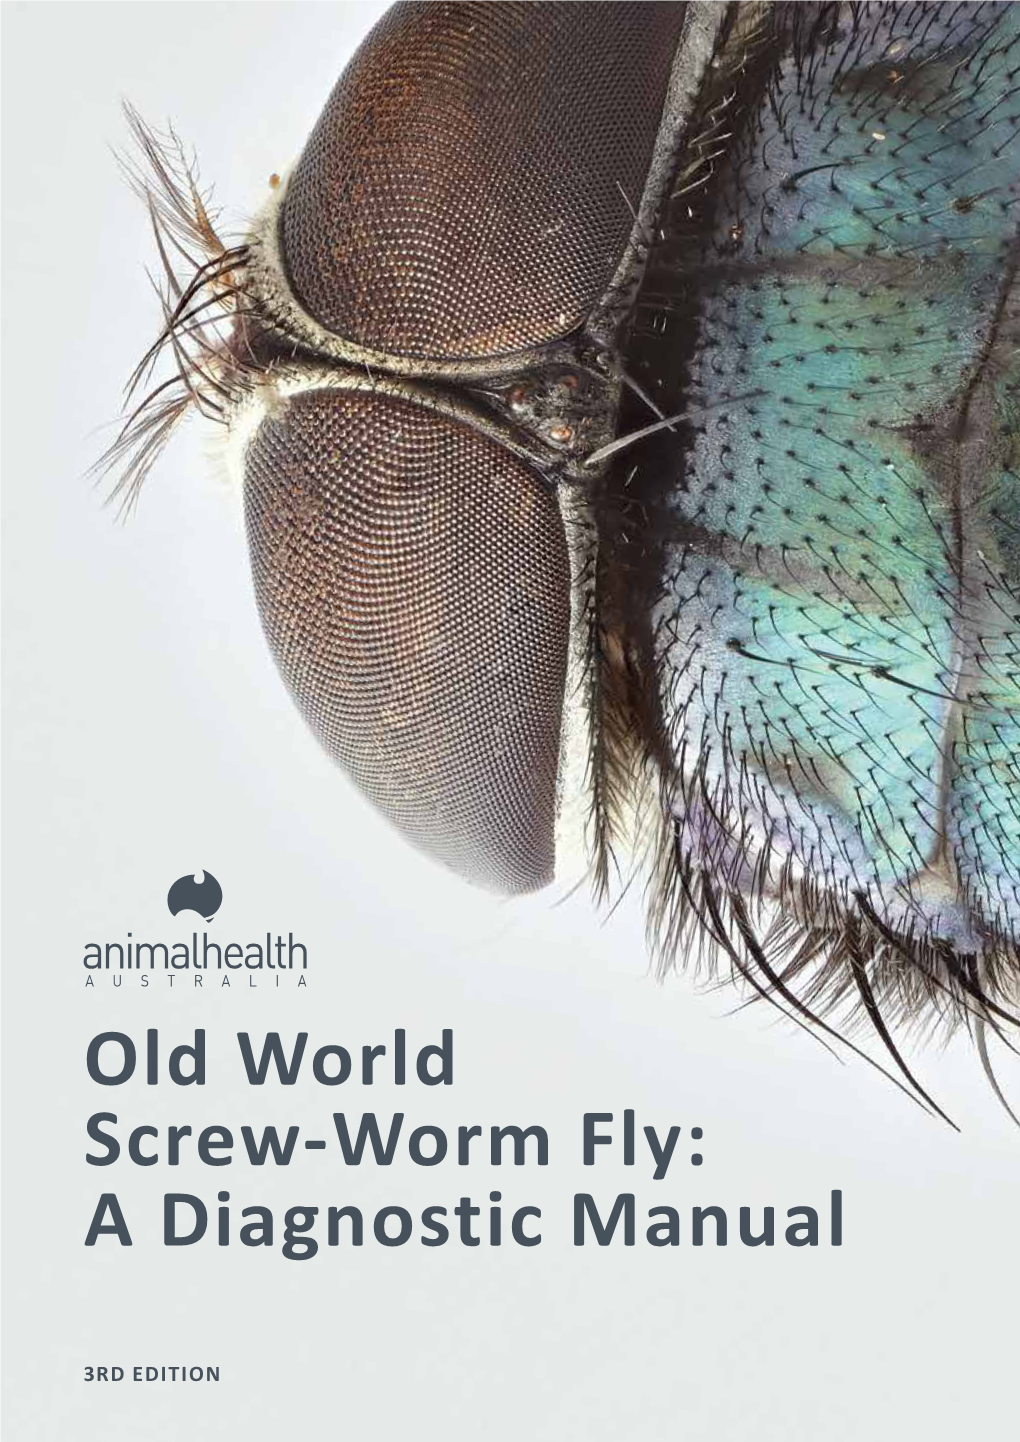 Old World Screw-Worm Fly: a Diagnostic Manual